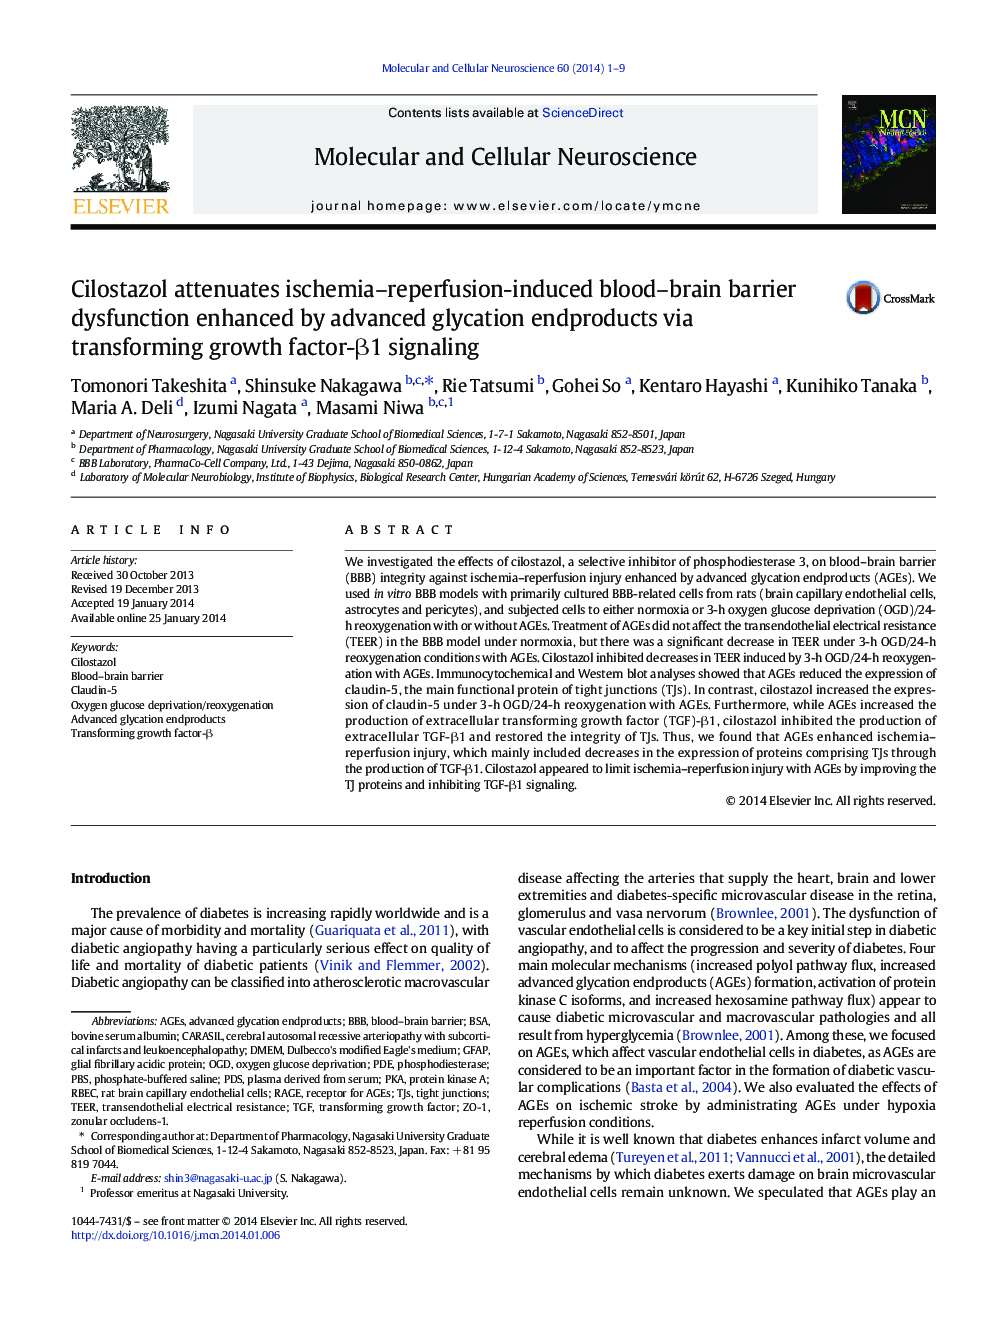 Cilostazol attenuates ischemia–reperfusion-induced blood–brain barrier dysfunction enhanced by advanced glycation endproducts via transforming growth factor-β1 signaling